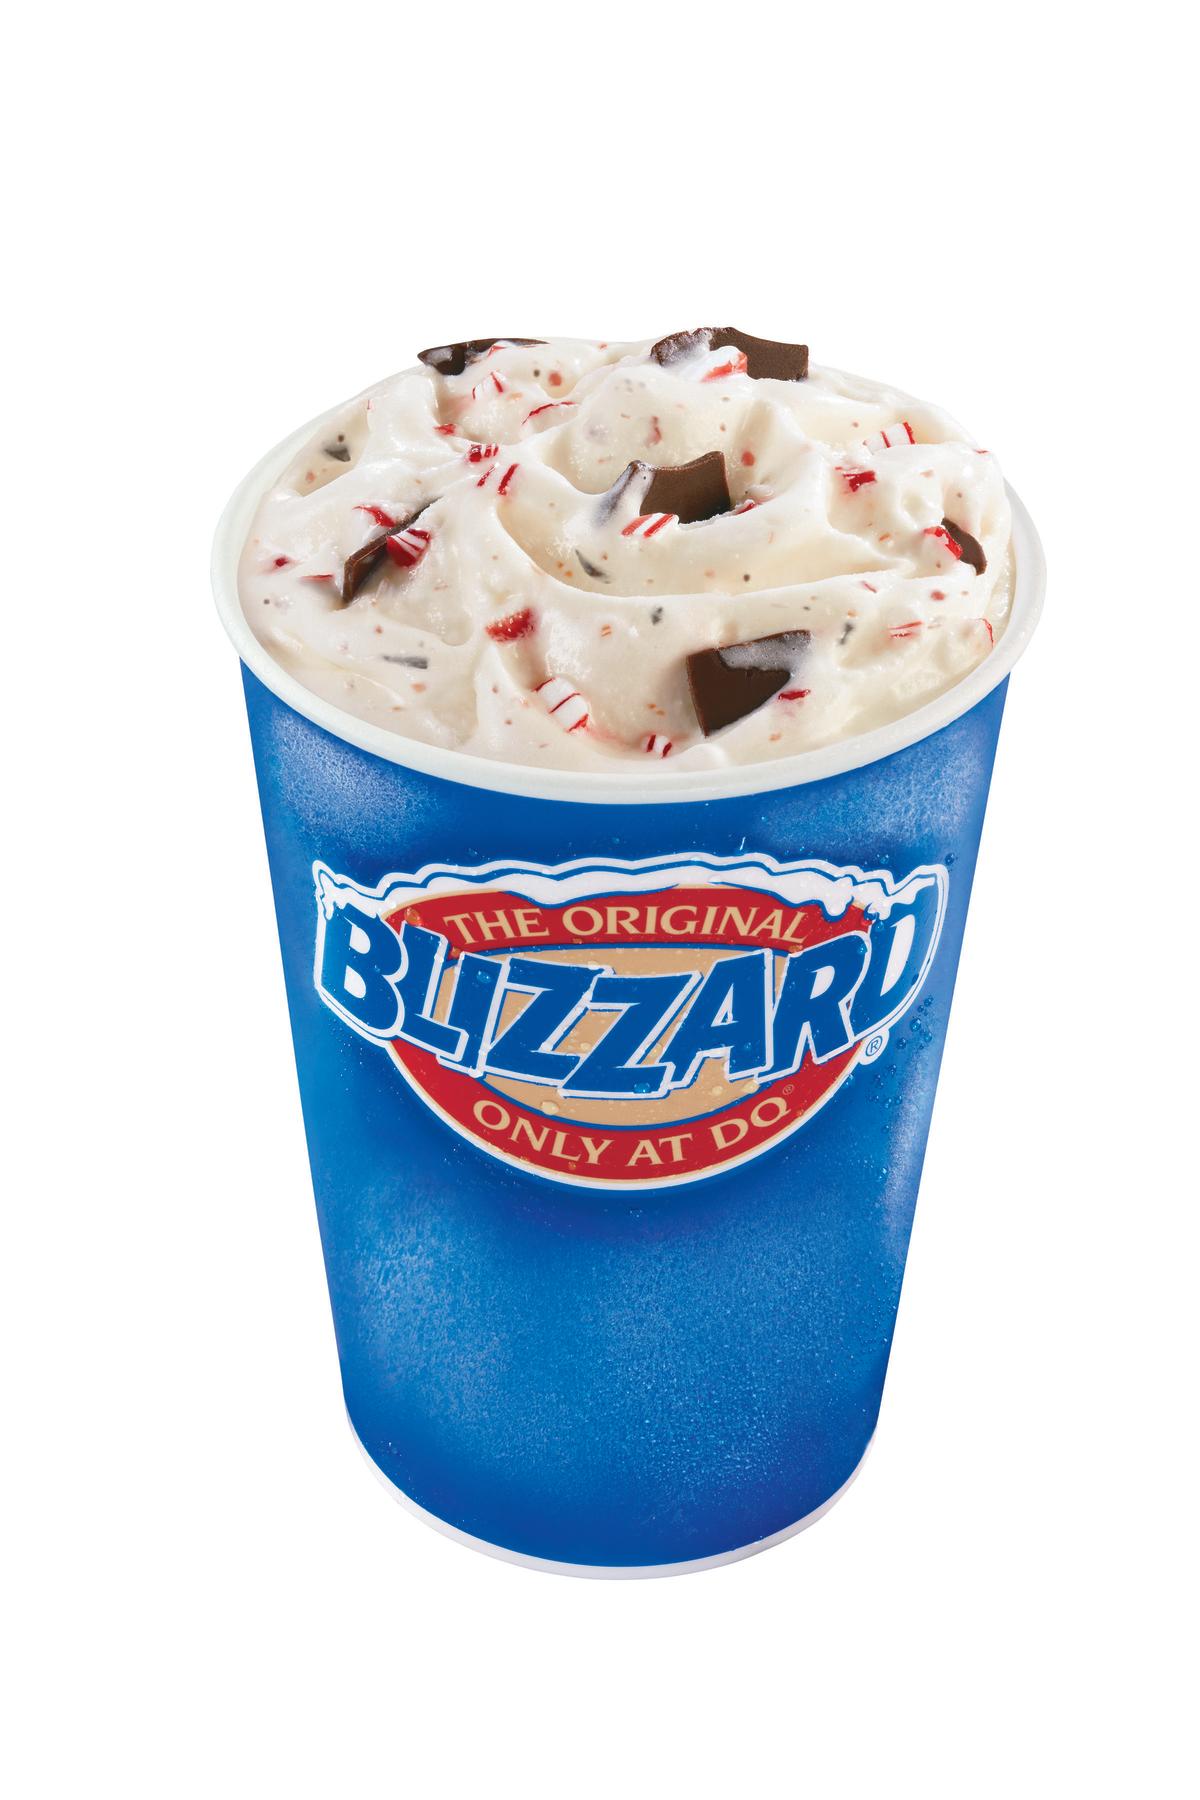 Dairy Queen’s Two Holiday Blizzards Are in Stores Now